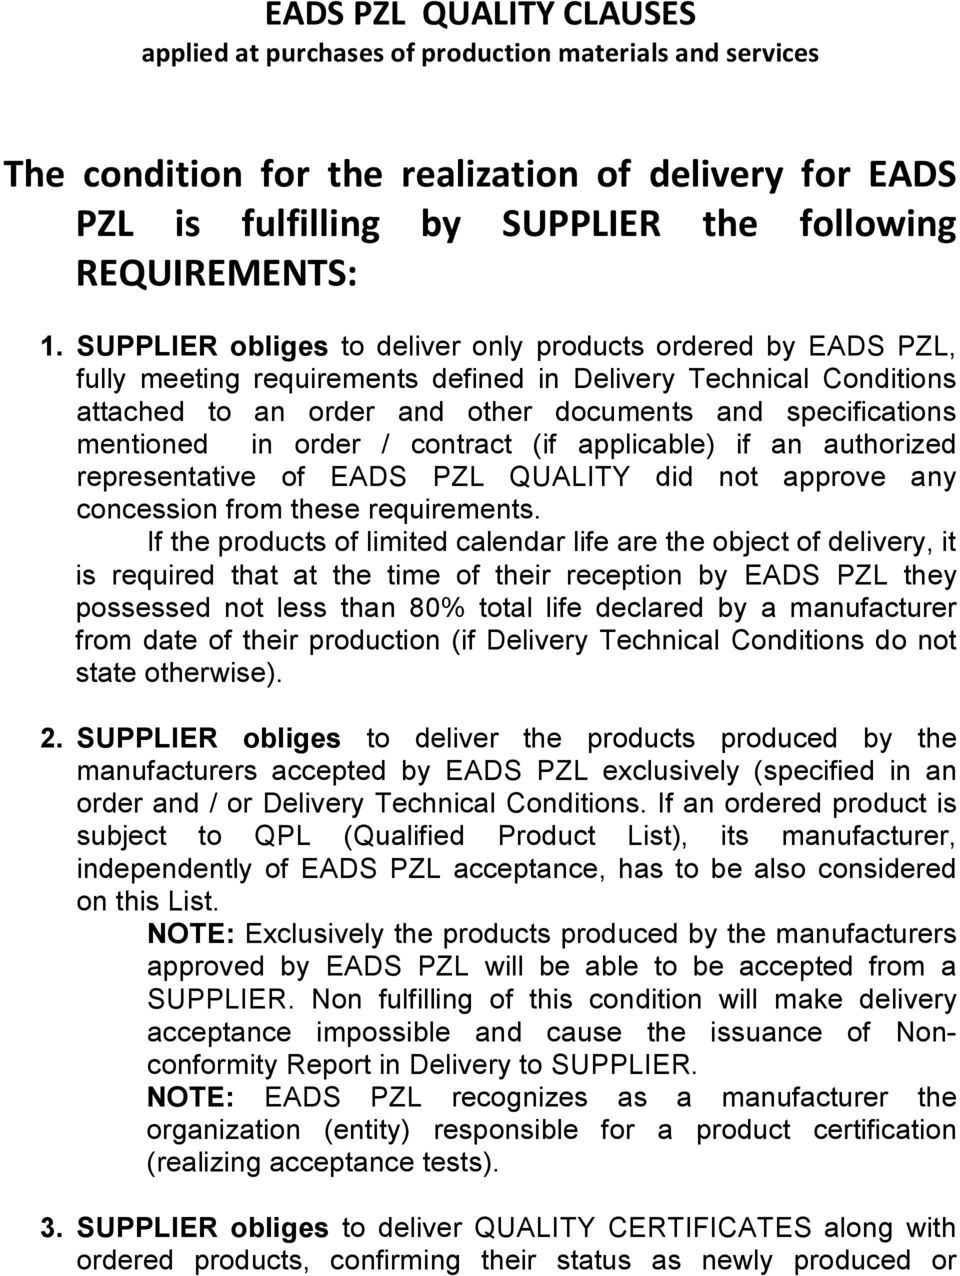 mentioned in order / contract (if applicable) if an authorized representative of EADS PZL QUALITY did not approve any concession from these requirements.